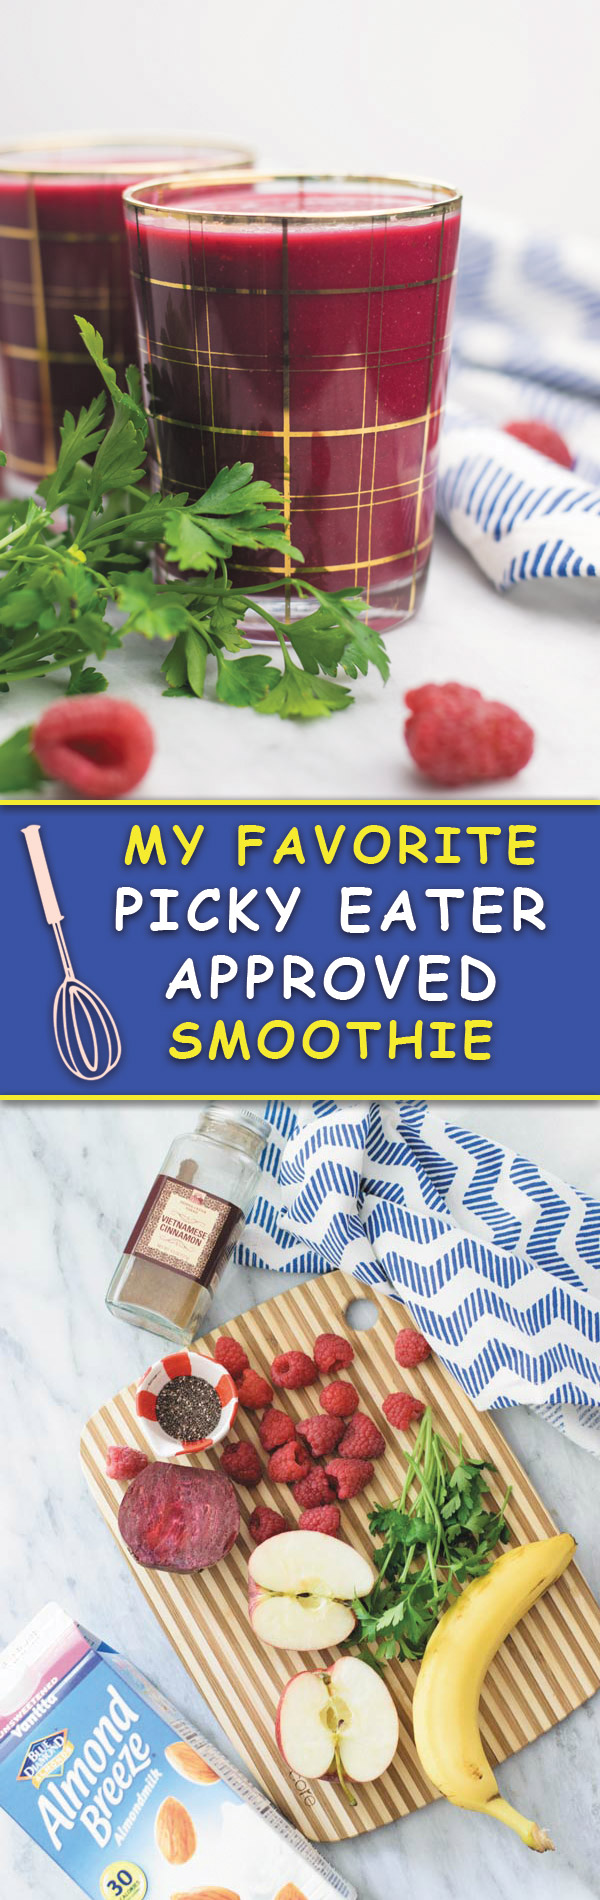 My favorite picky eater approved smoothie - Even your pickiest eaters will LOVE this smoothie! Packed with banana, apple, raw beets, parsley, berries,cinnamon, chia seeds.